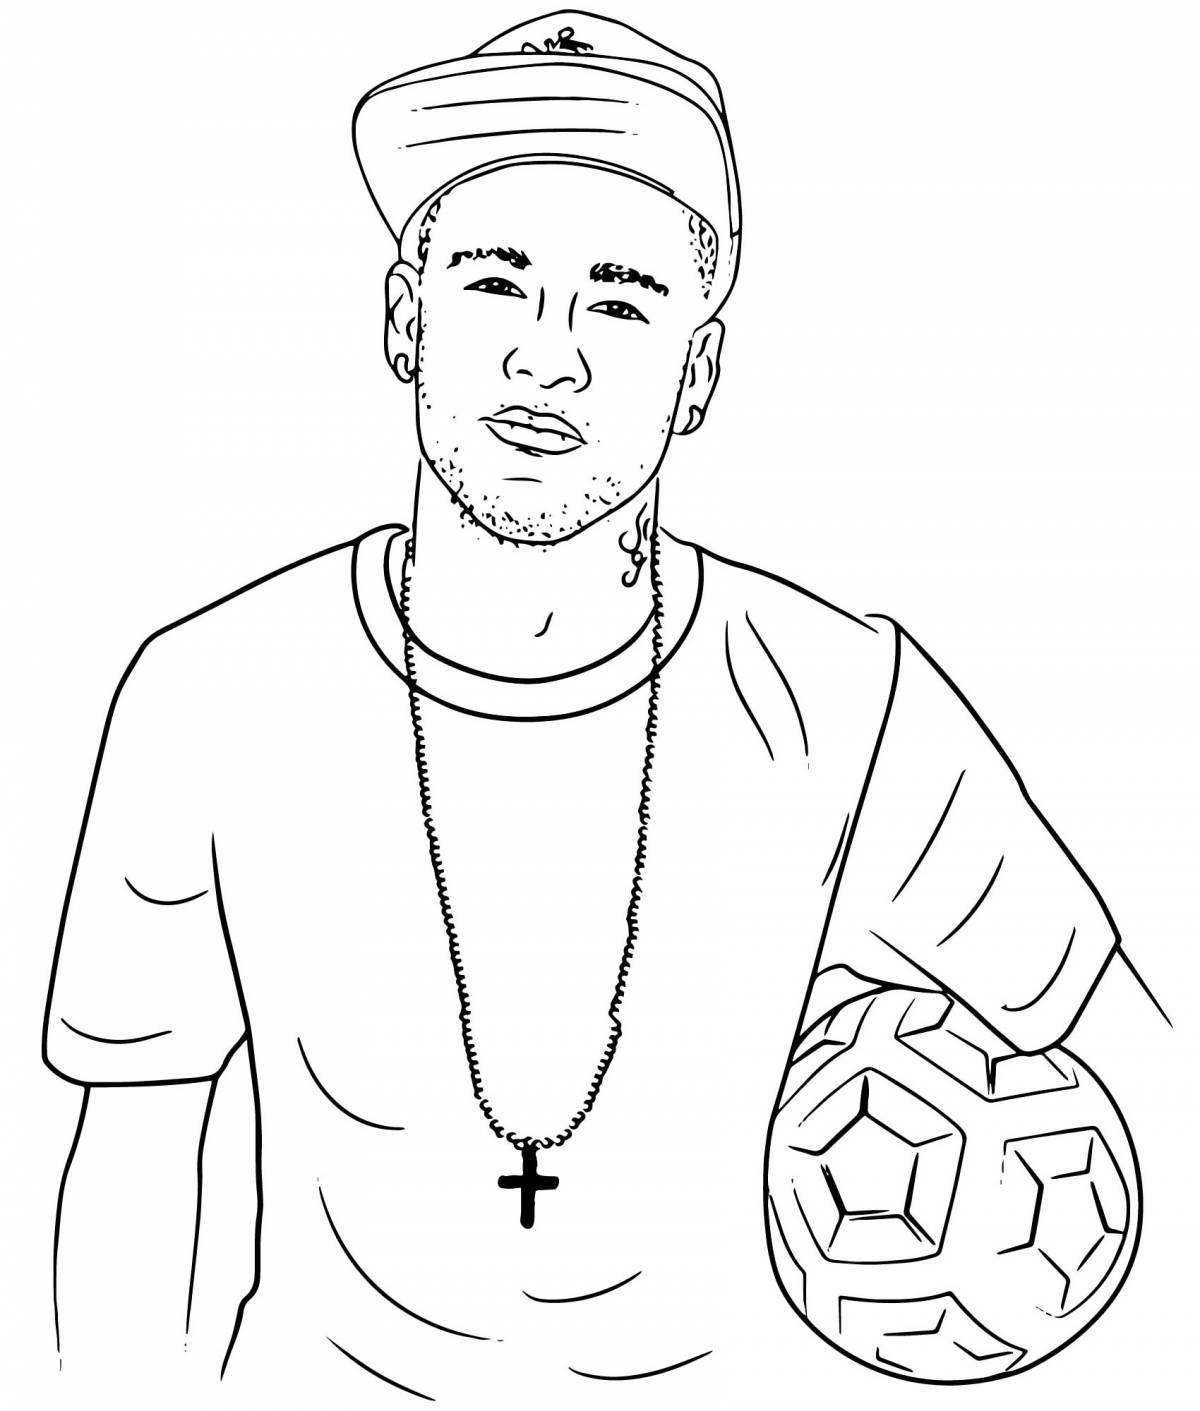 Benzema inviting coloring page